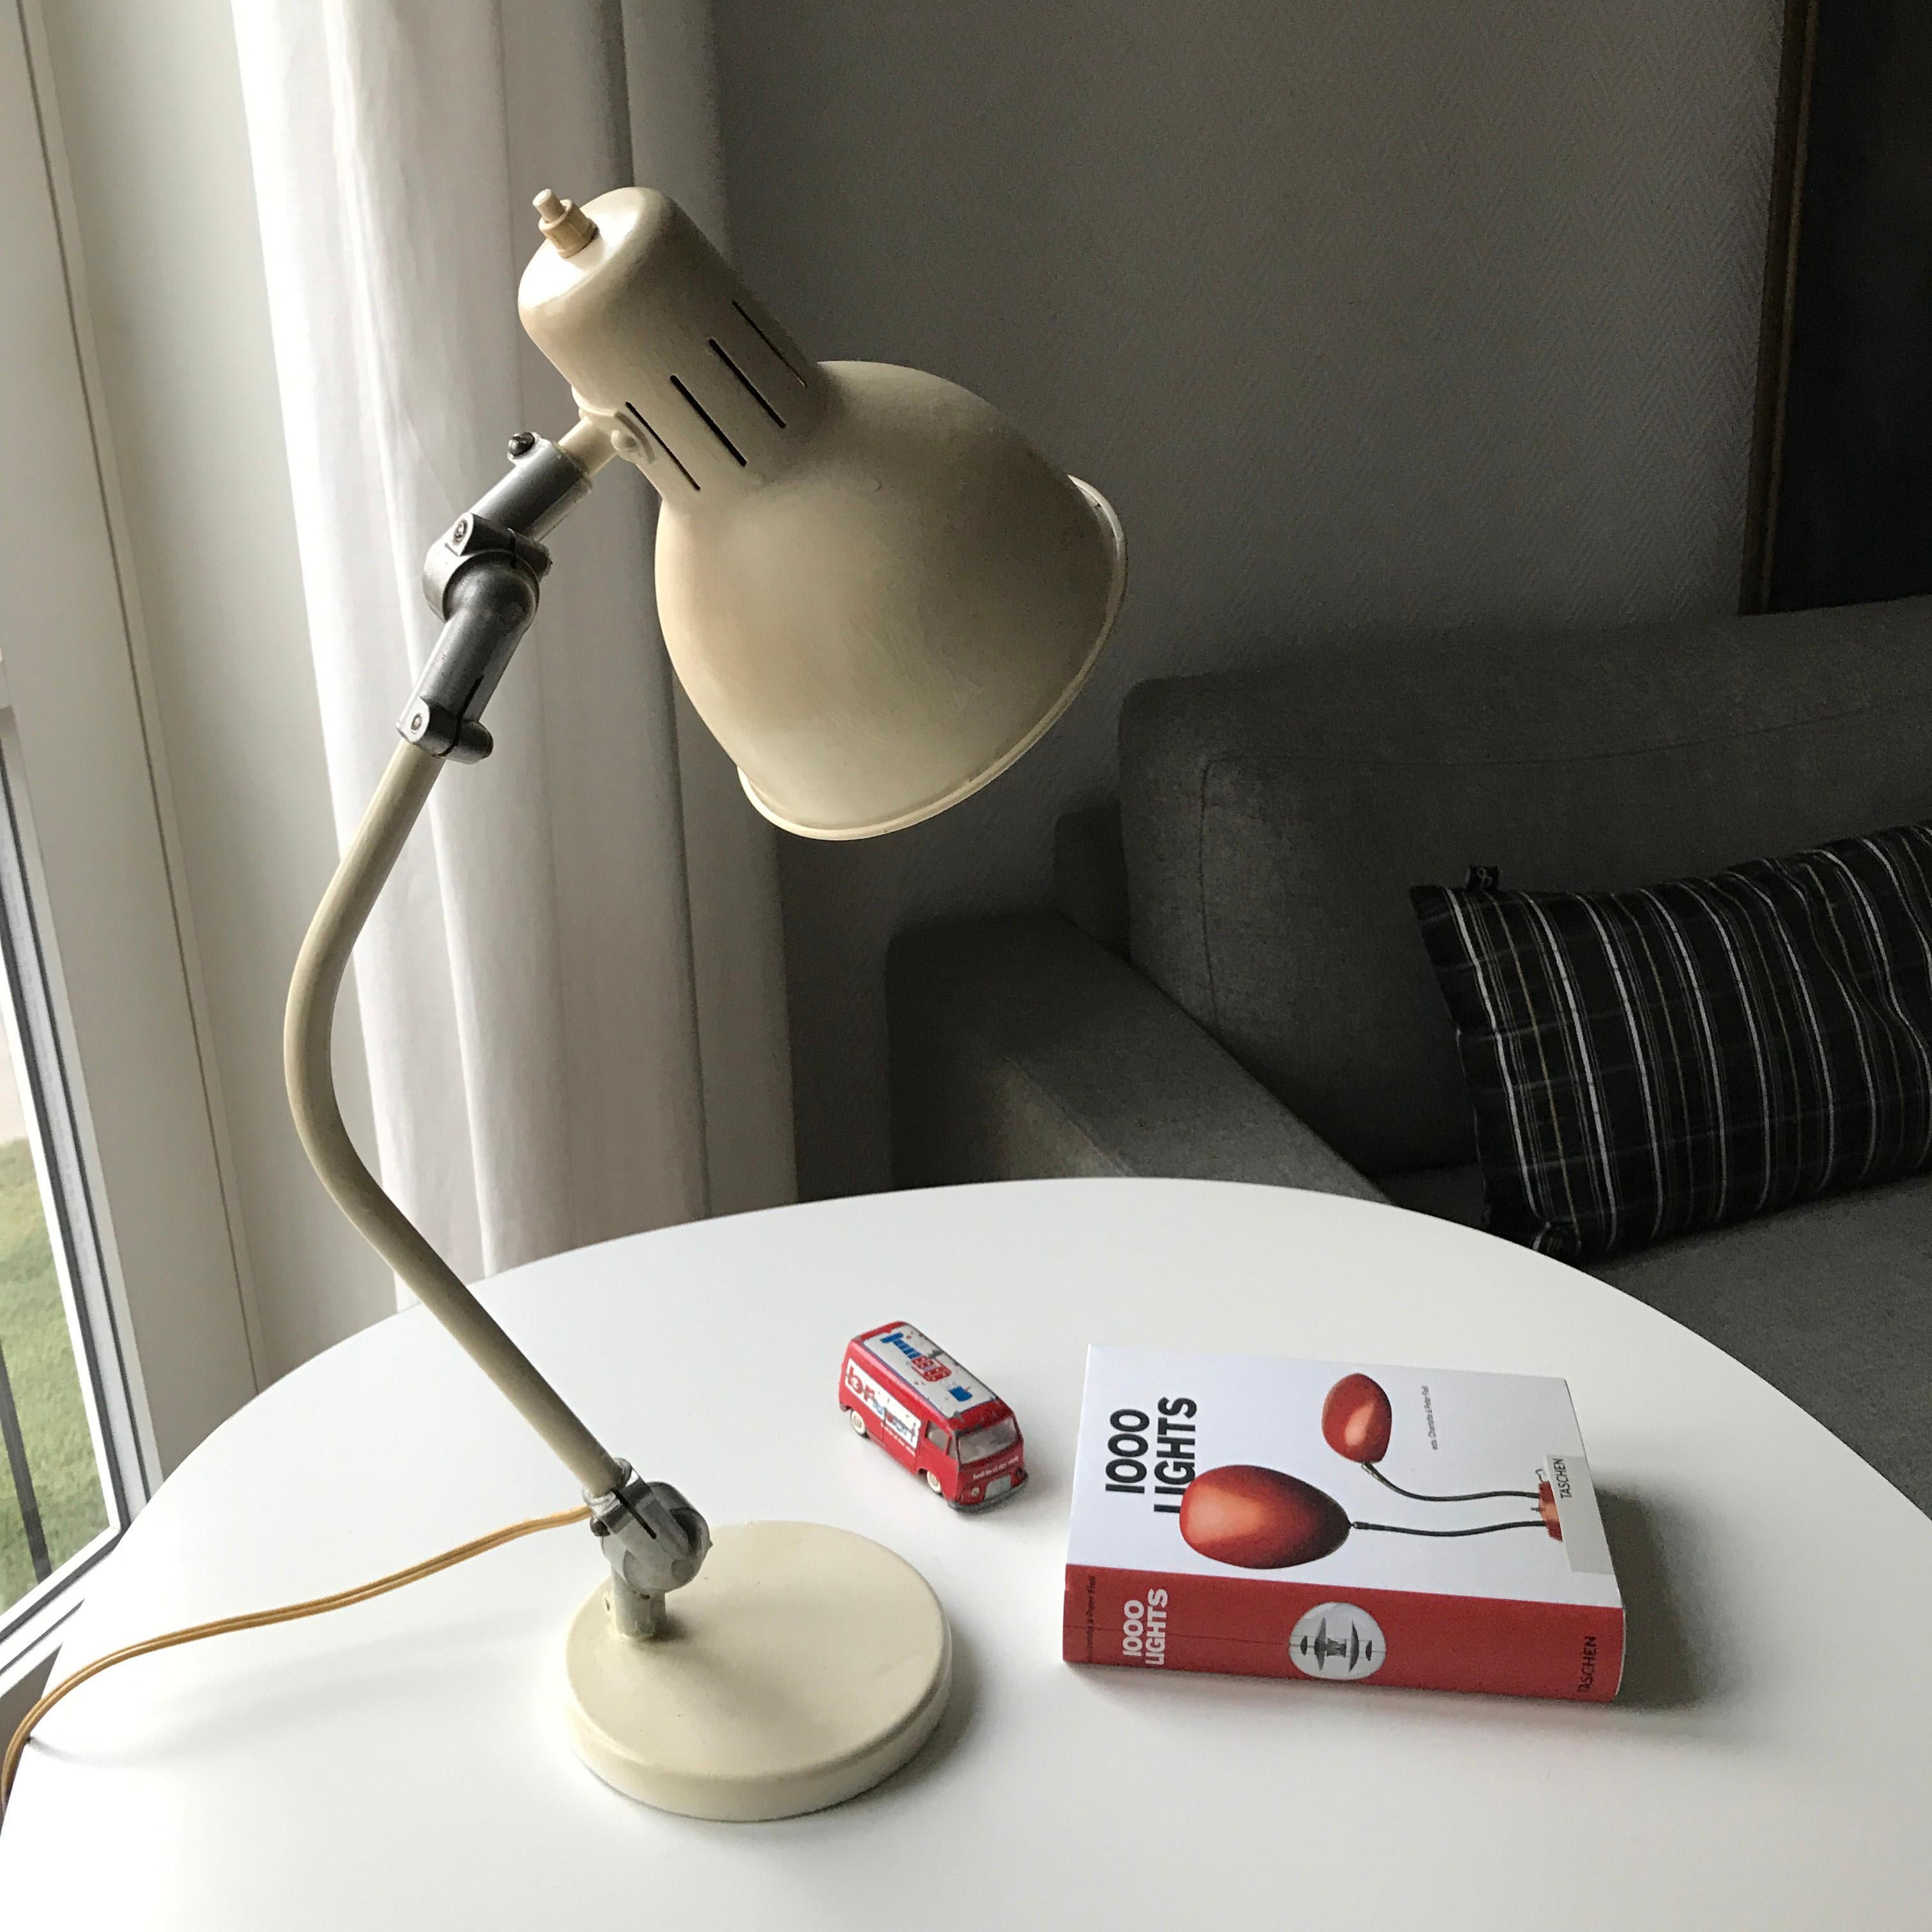 MARQUE RIJO industrial style midcentury desk lamp. Free shipping! The design is kind of the same principals as the more famous French Jielde Desk Lamps. They were made in many different sizes and various numbers of arms. Often used in factory and